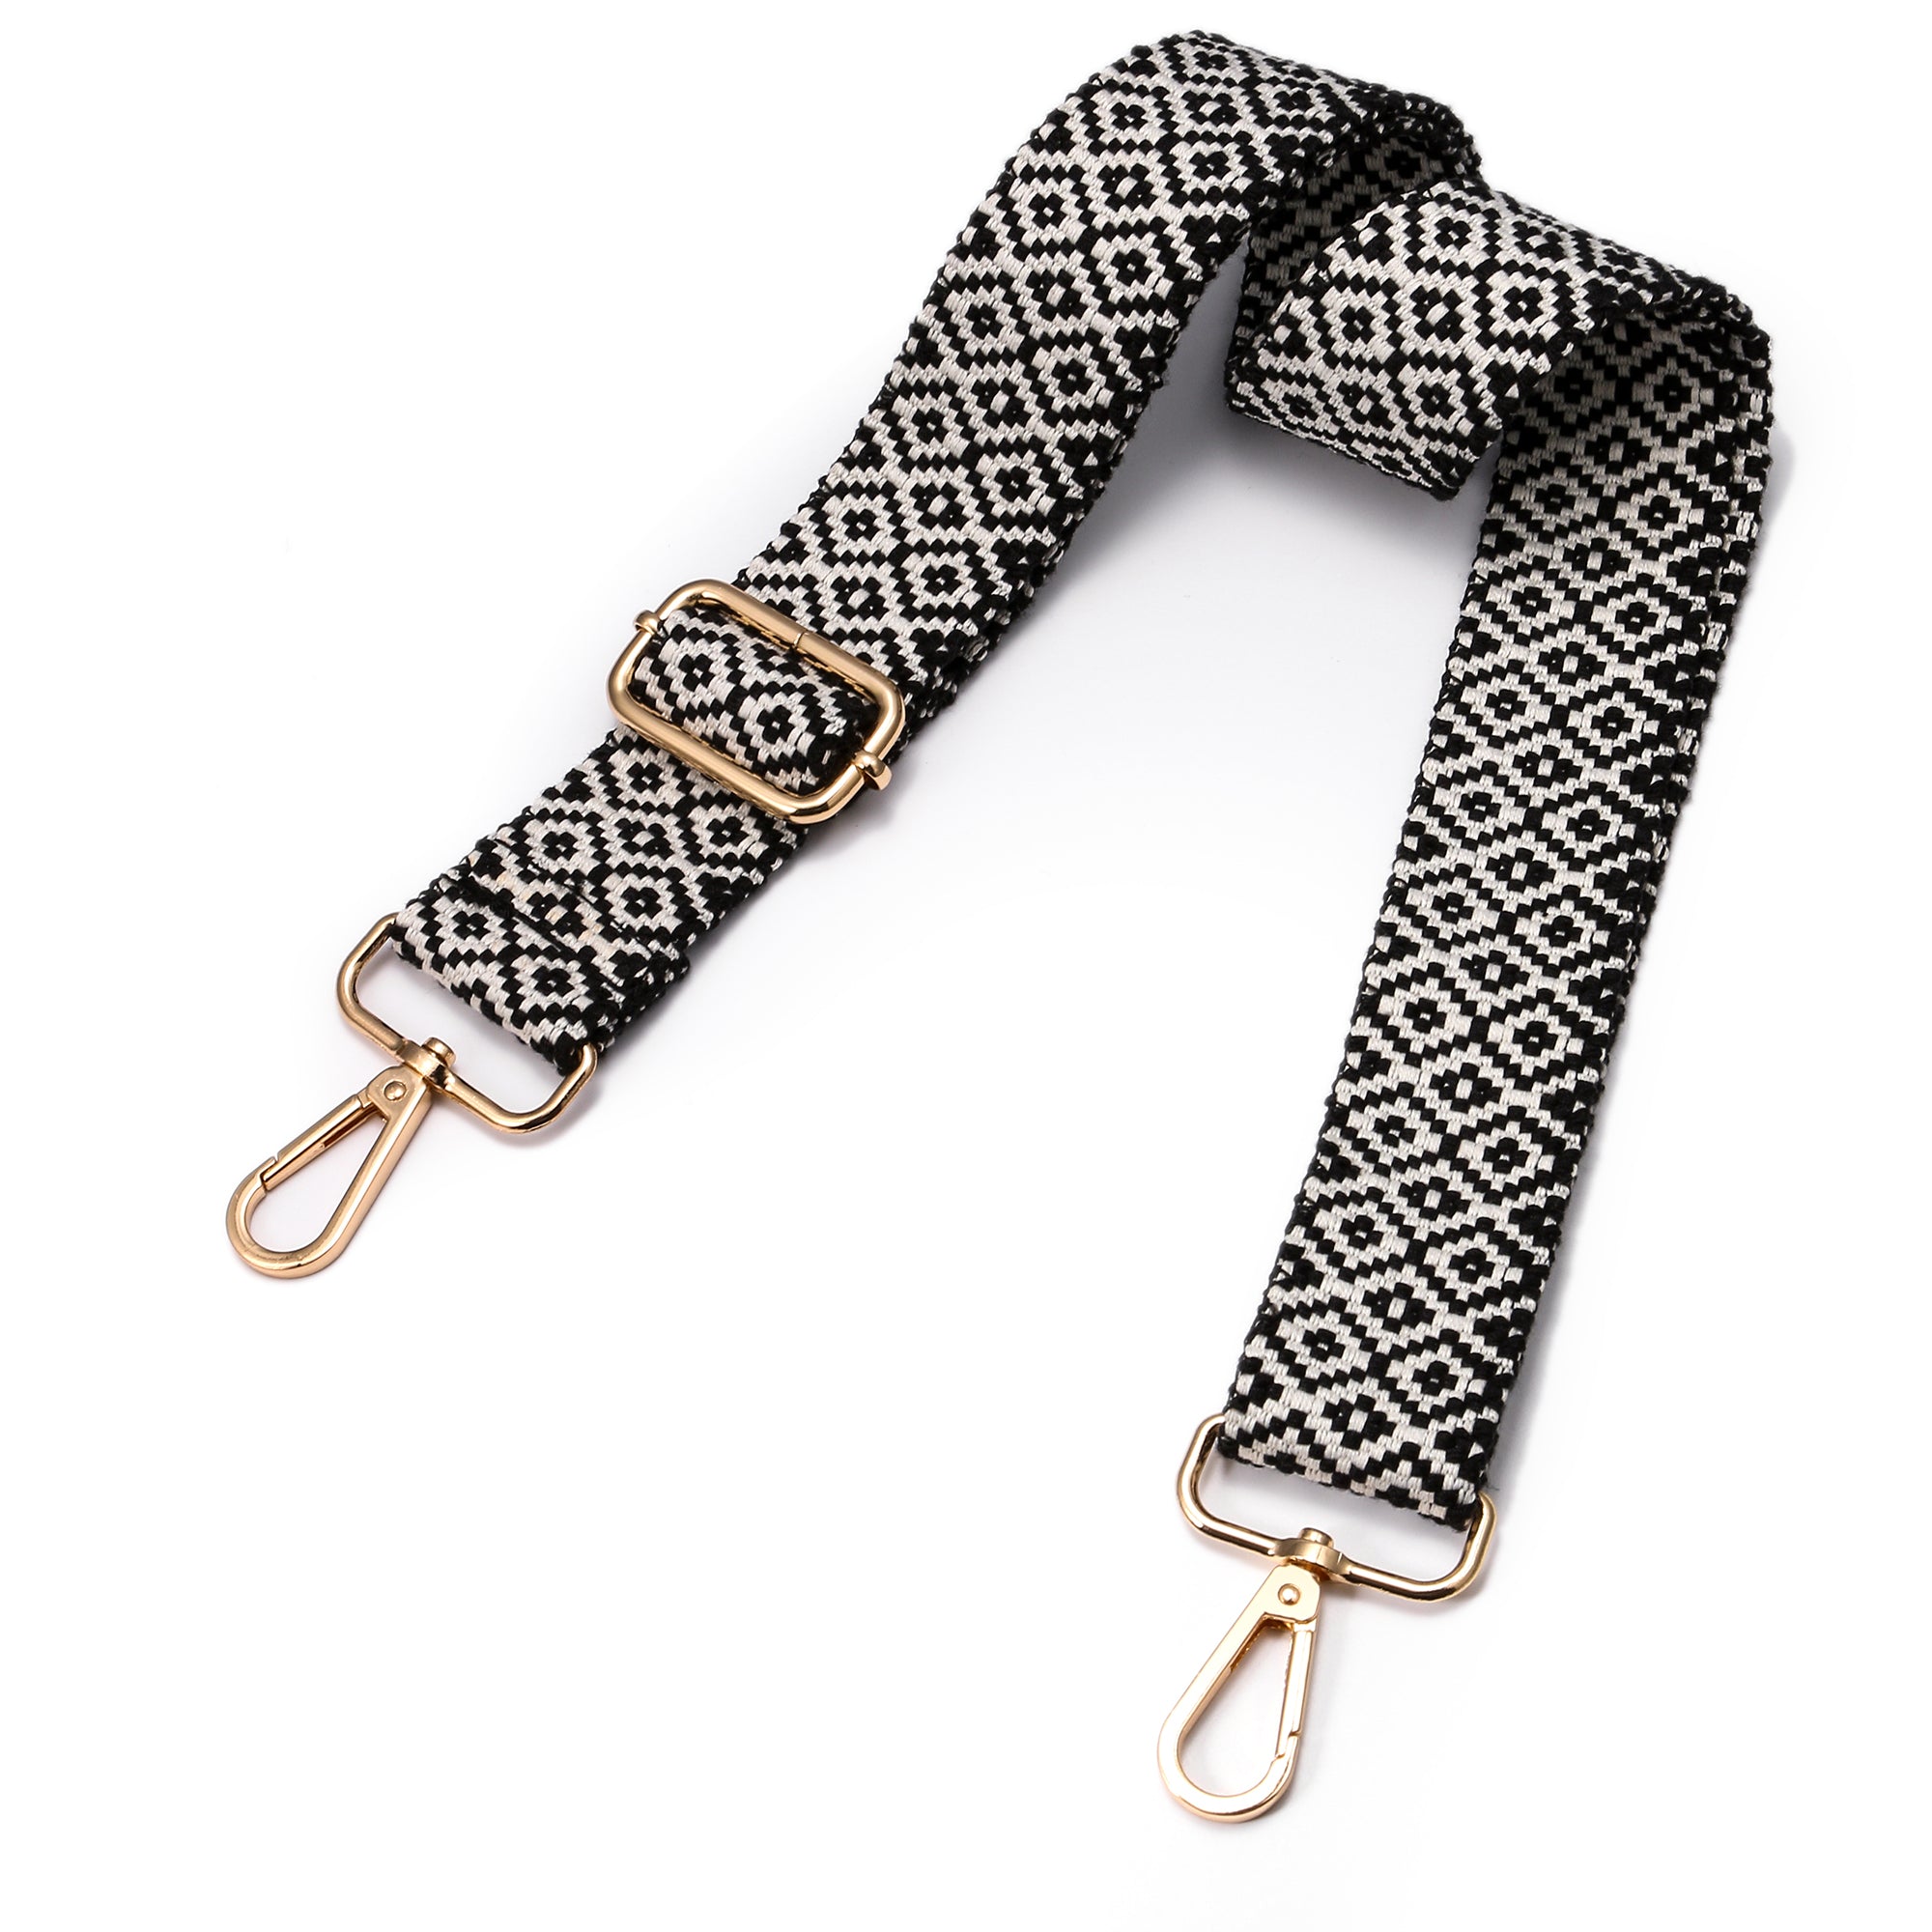 1 Pc PU Leather Chain Strap Replacement Bag Purse Strap Cross Body Replace  Strap 